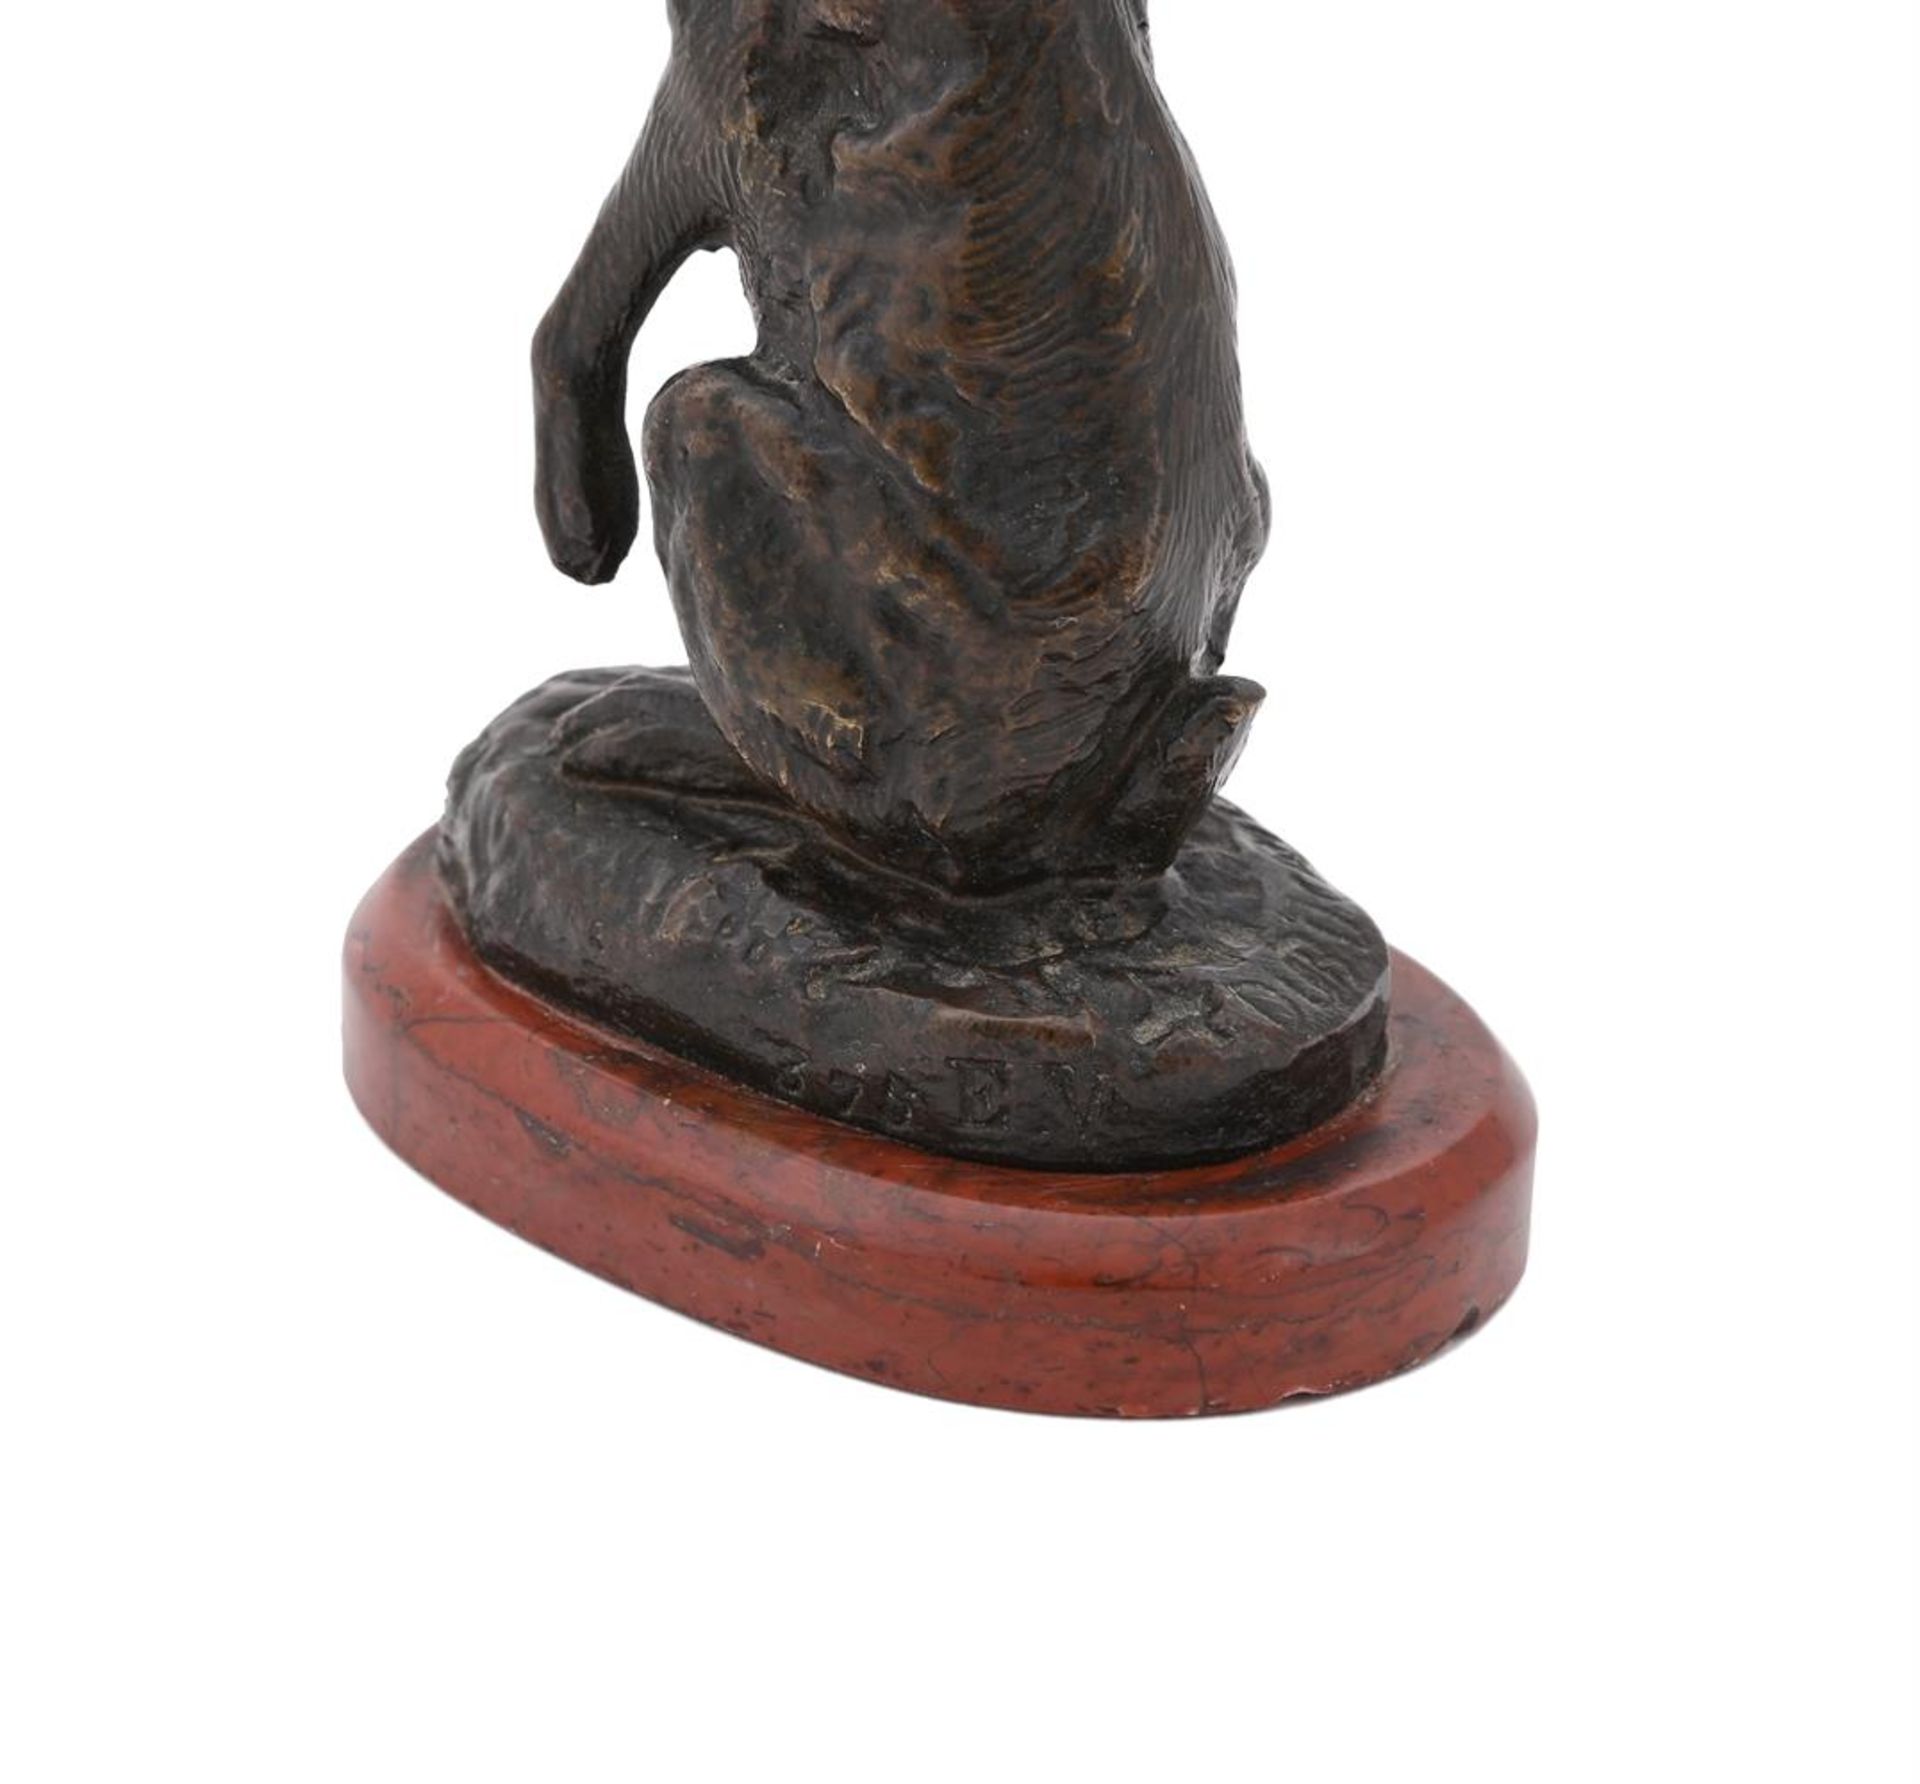 ALFRED DUBUCAND (FRENCH, 1828-1894), A BRONZE MODEL OF AN ALERT HARE - Image 5 of 6